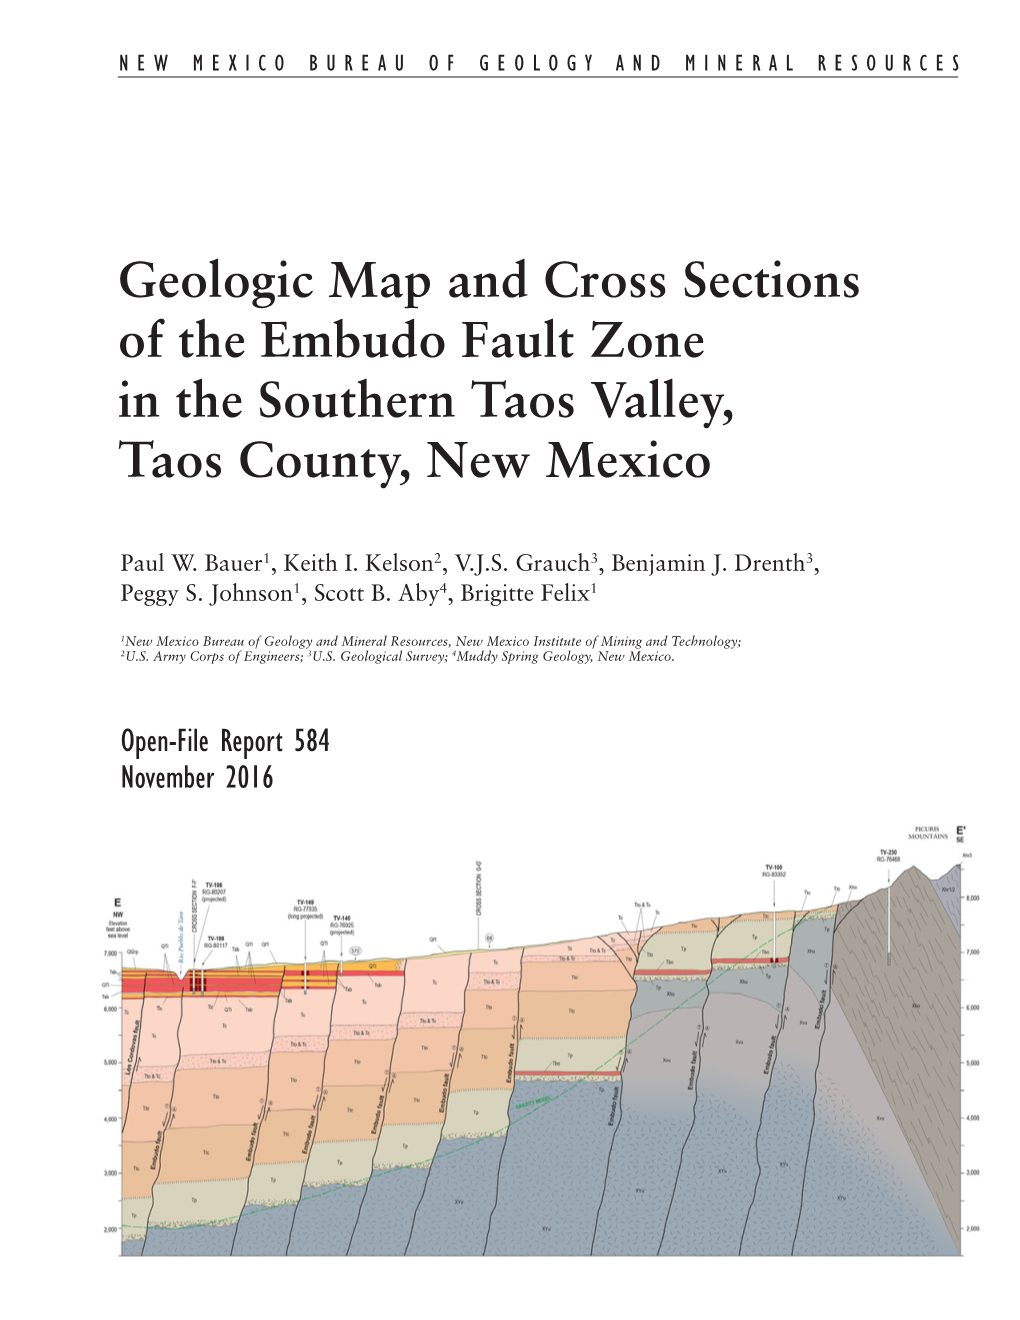 Geologic Map and Cross Sections of the Embudo Fault Zone in the Southern Taos Valley, Taos County, New Mexico